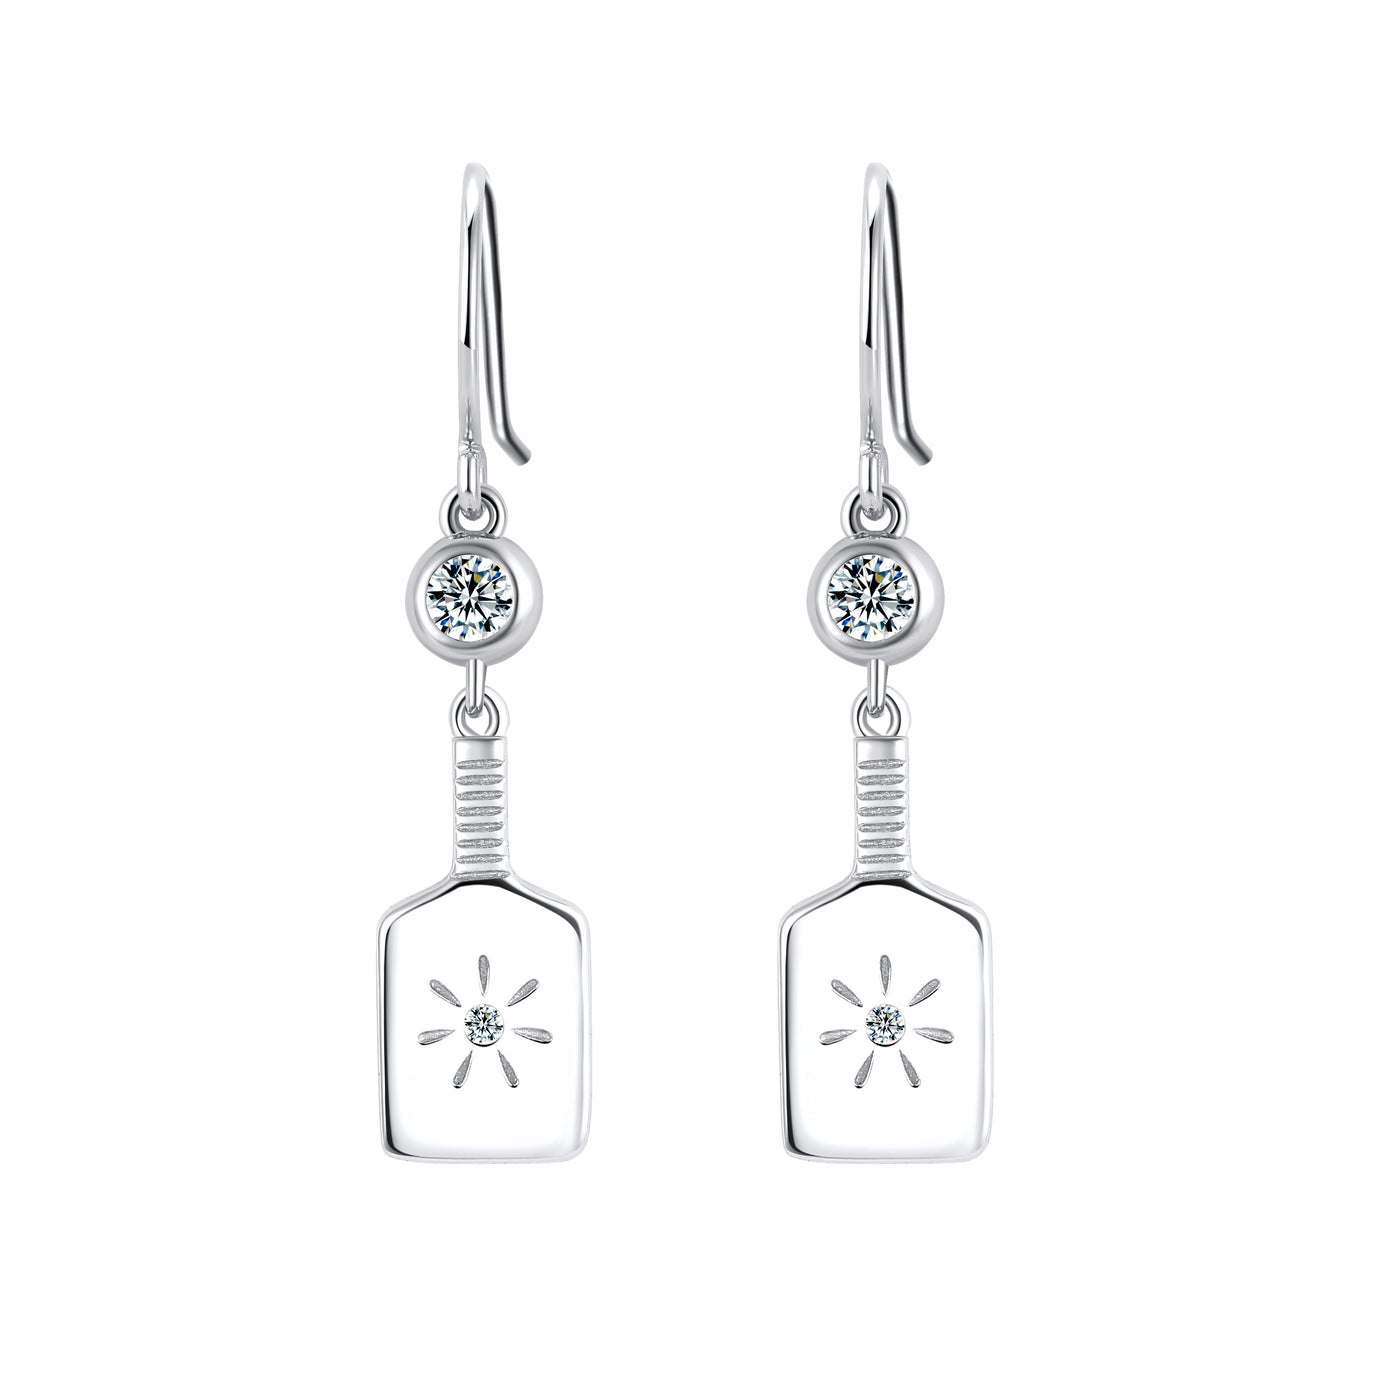 PickleBelle Paddle Drop Earrings in Sterling Silver. Features a dangling paddle below a sparkling crystal. Paddle even has a tiny stone and burst in the center reminiscent of a good hit on that sweet spot! These earrings dangle and are Sterling Silver with a protective rhodium plating.